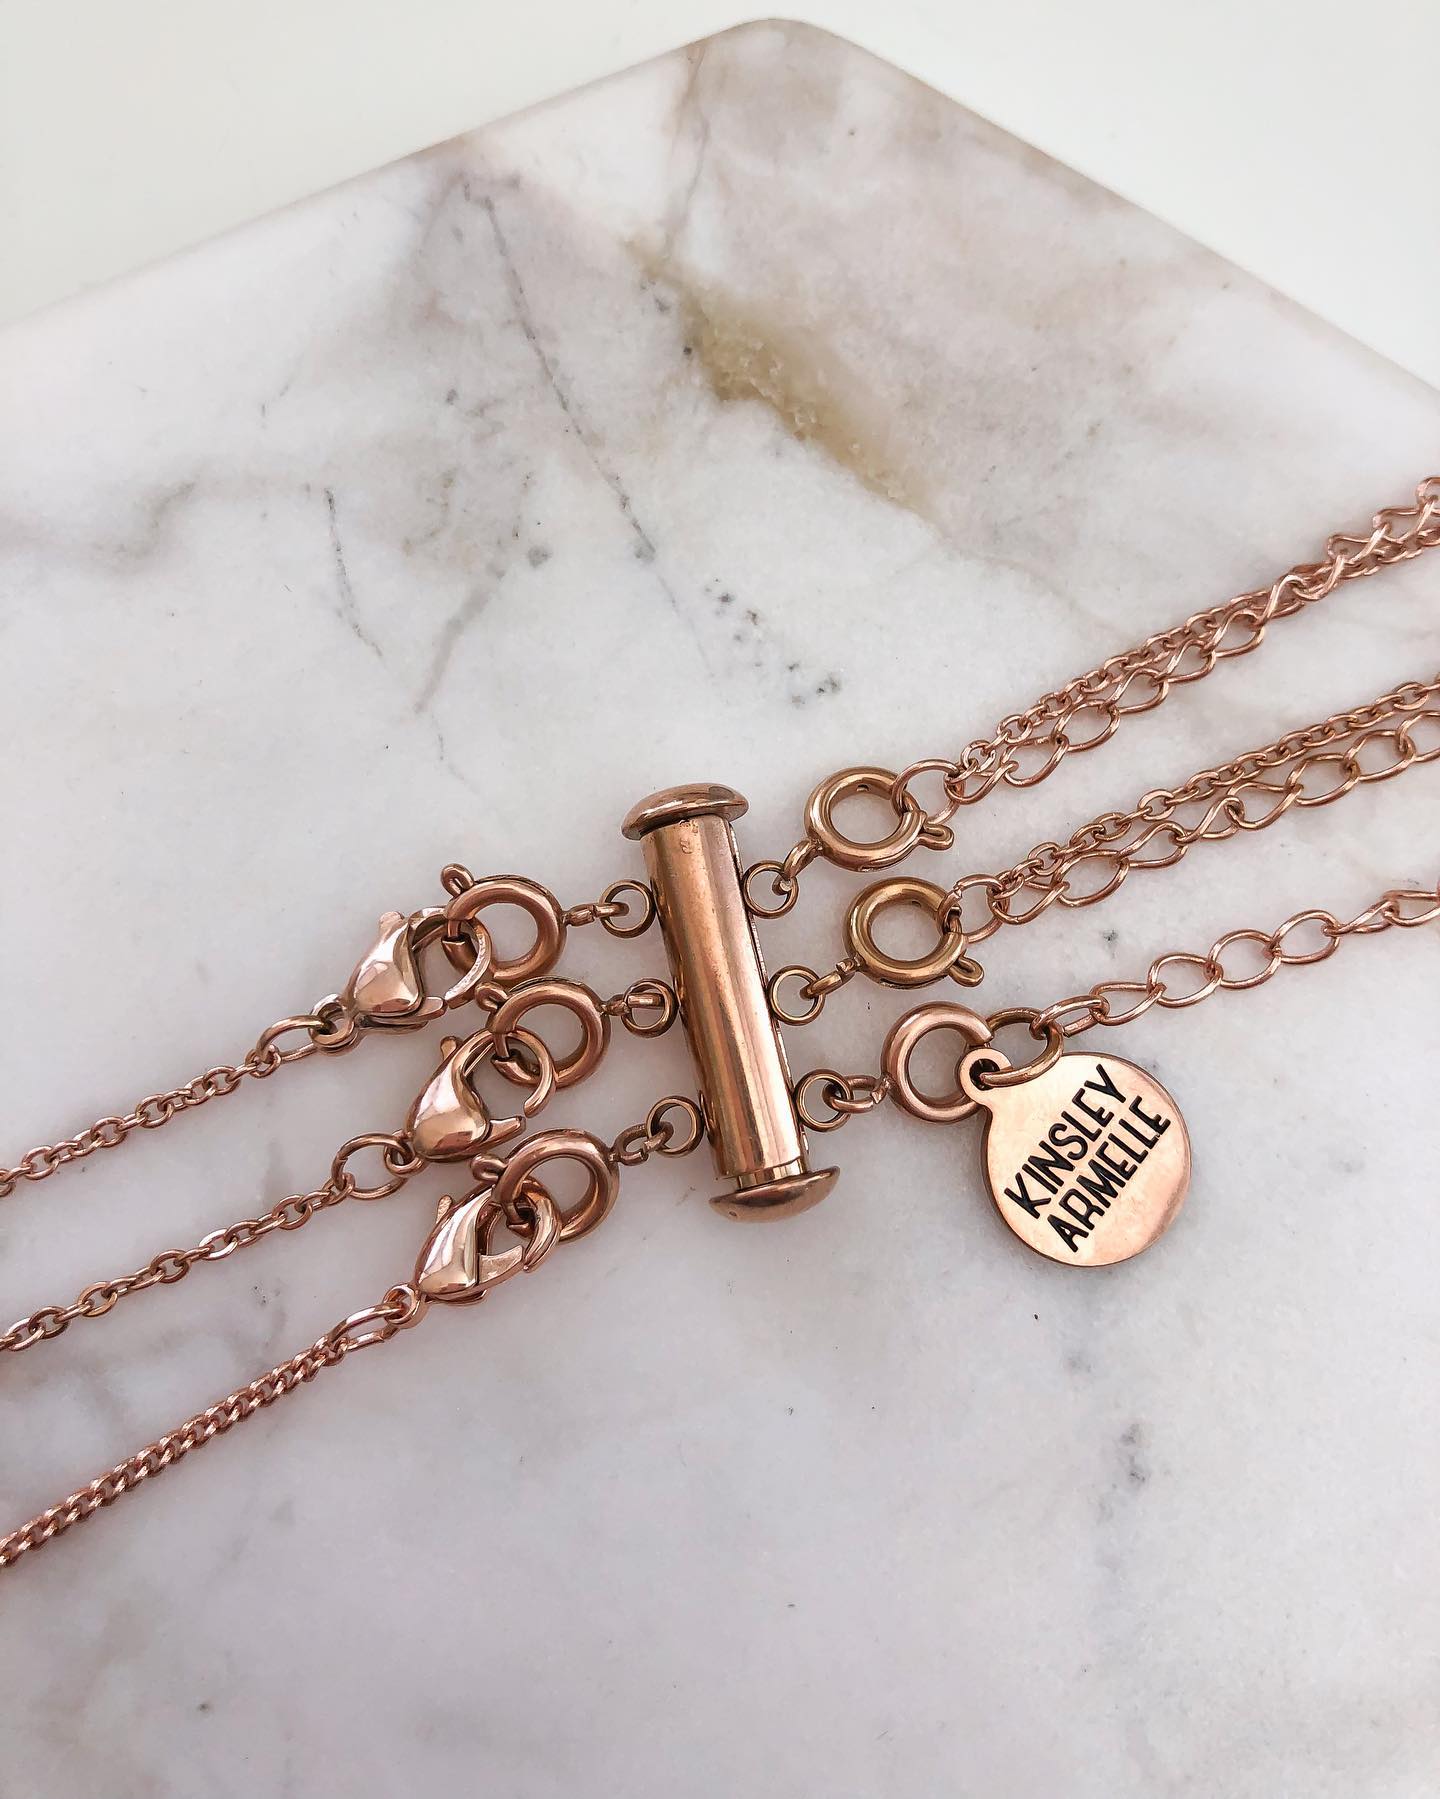 Kinsley Armelle 18K Rose Gold Ion Plated Stainless Steel Pink Layering Magnetic Smooth Bar Necklace Clasp Accessory